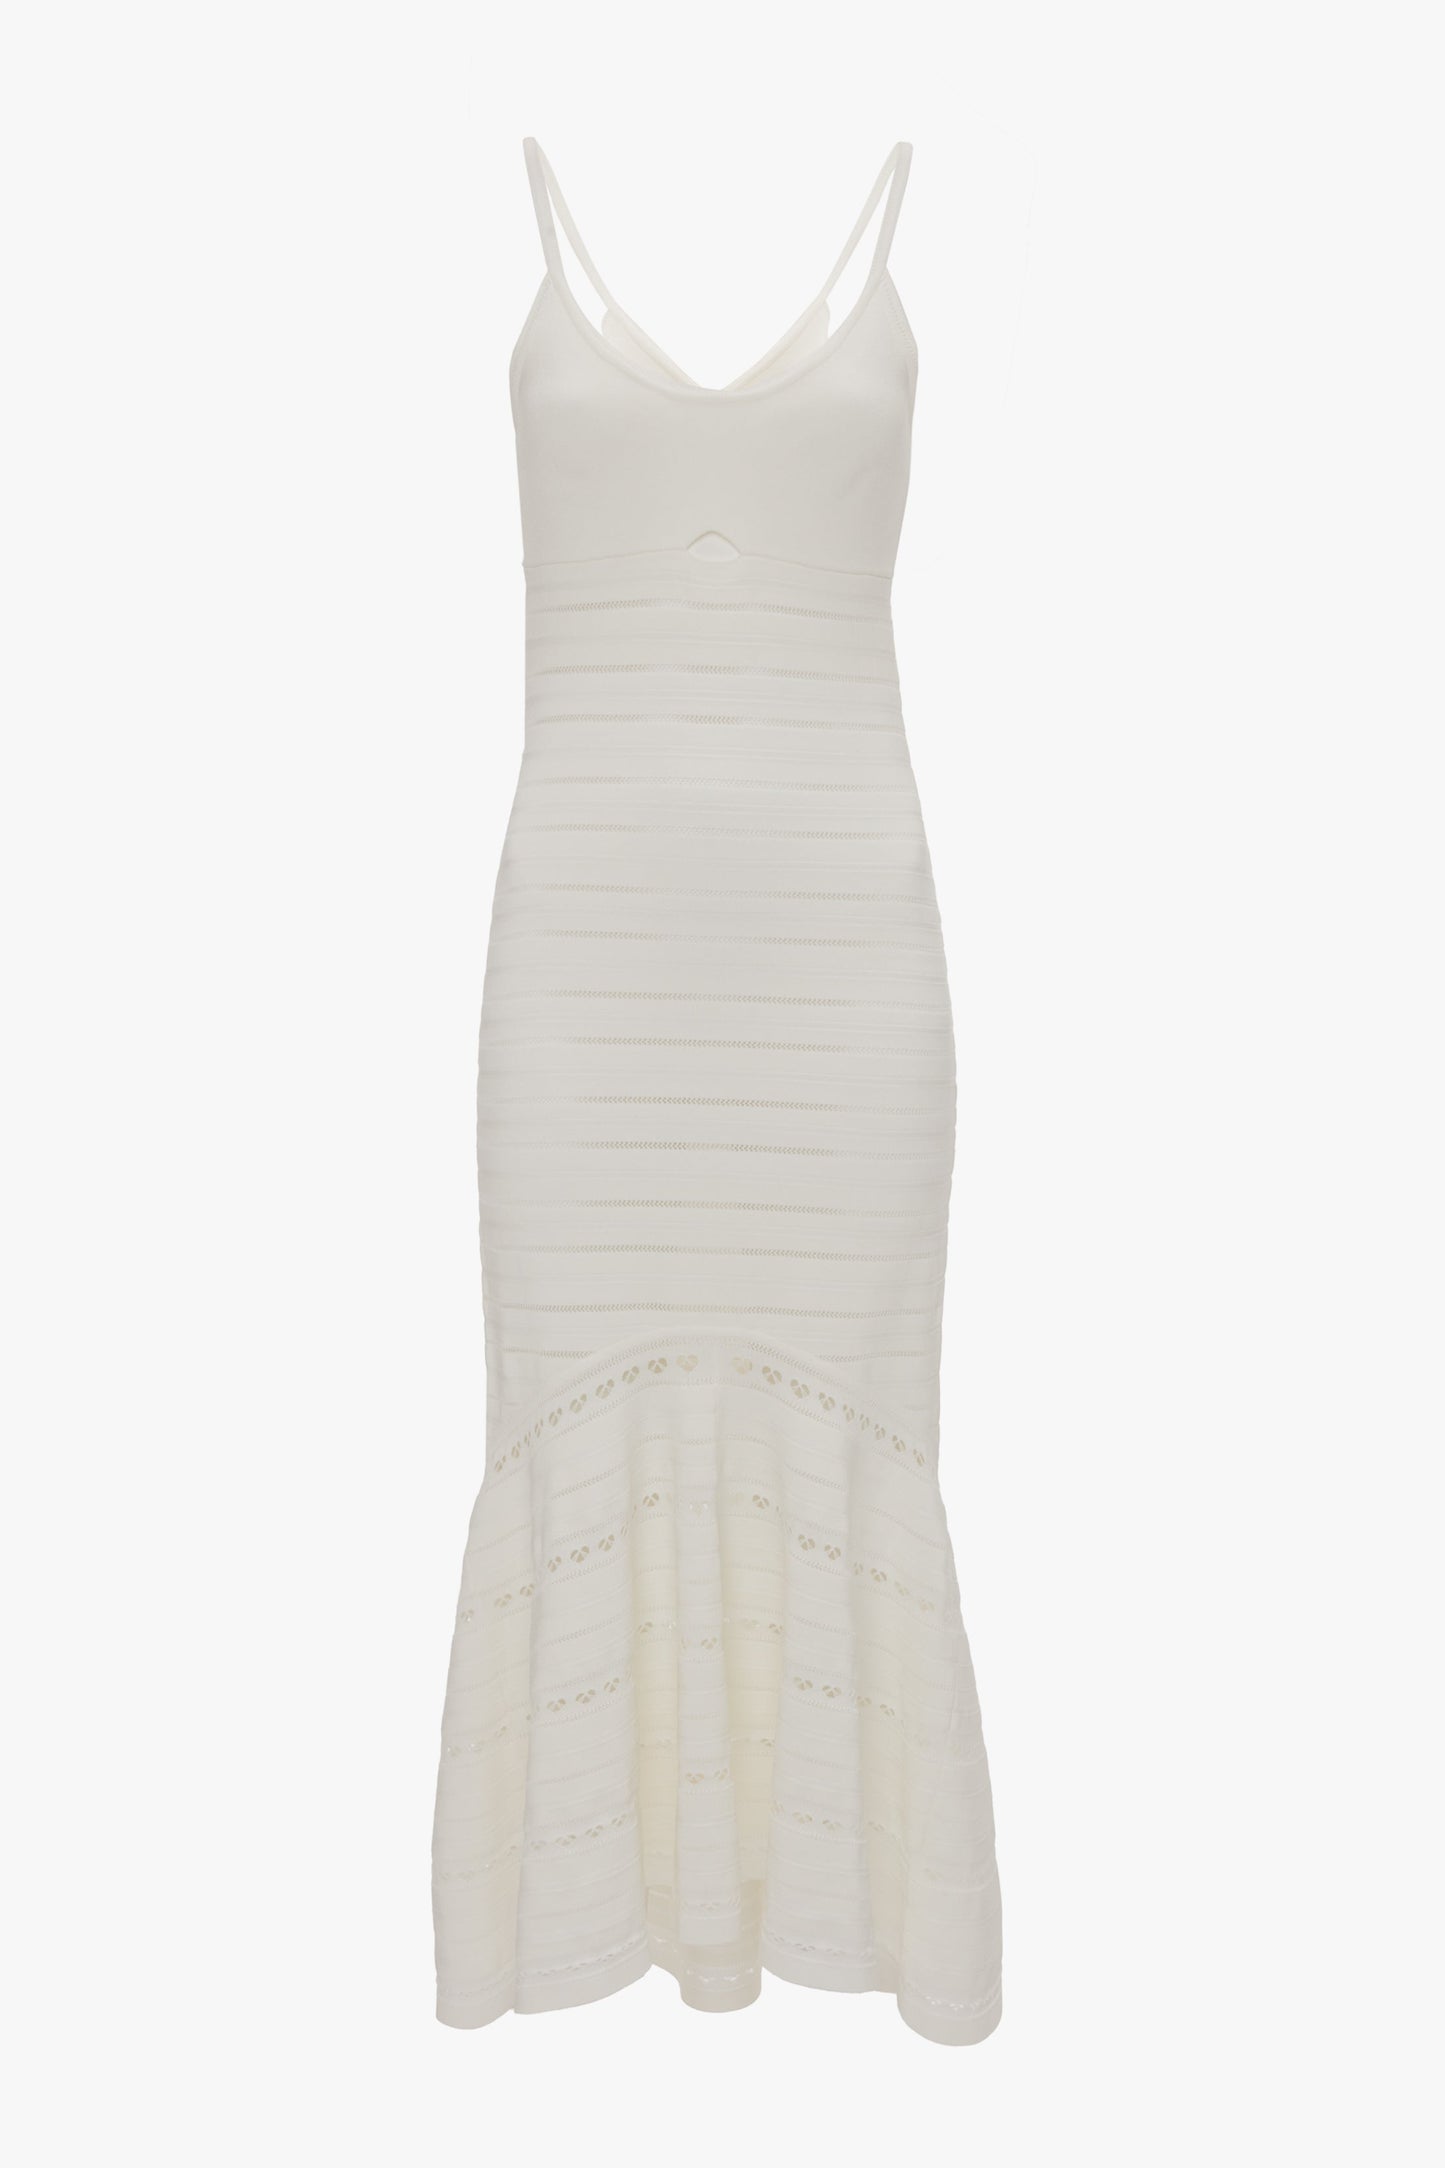 A sleeveless, fitted white dress with thin straps, featuring a flared, tiered hem and subtle cut-out details. Introducing the Cut-Out Detail Cami Dress In White by Victoria Beckham.